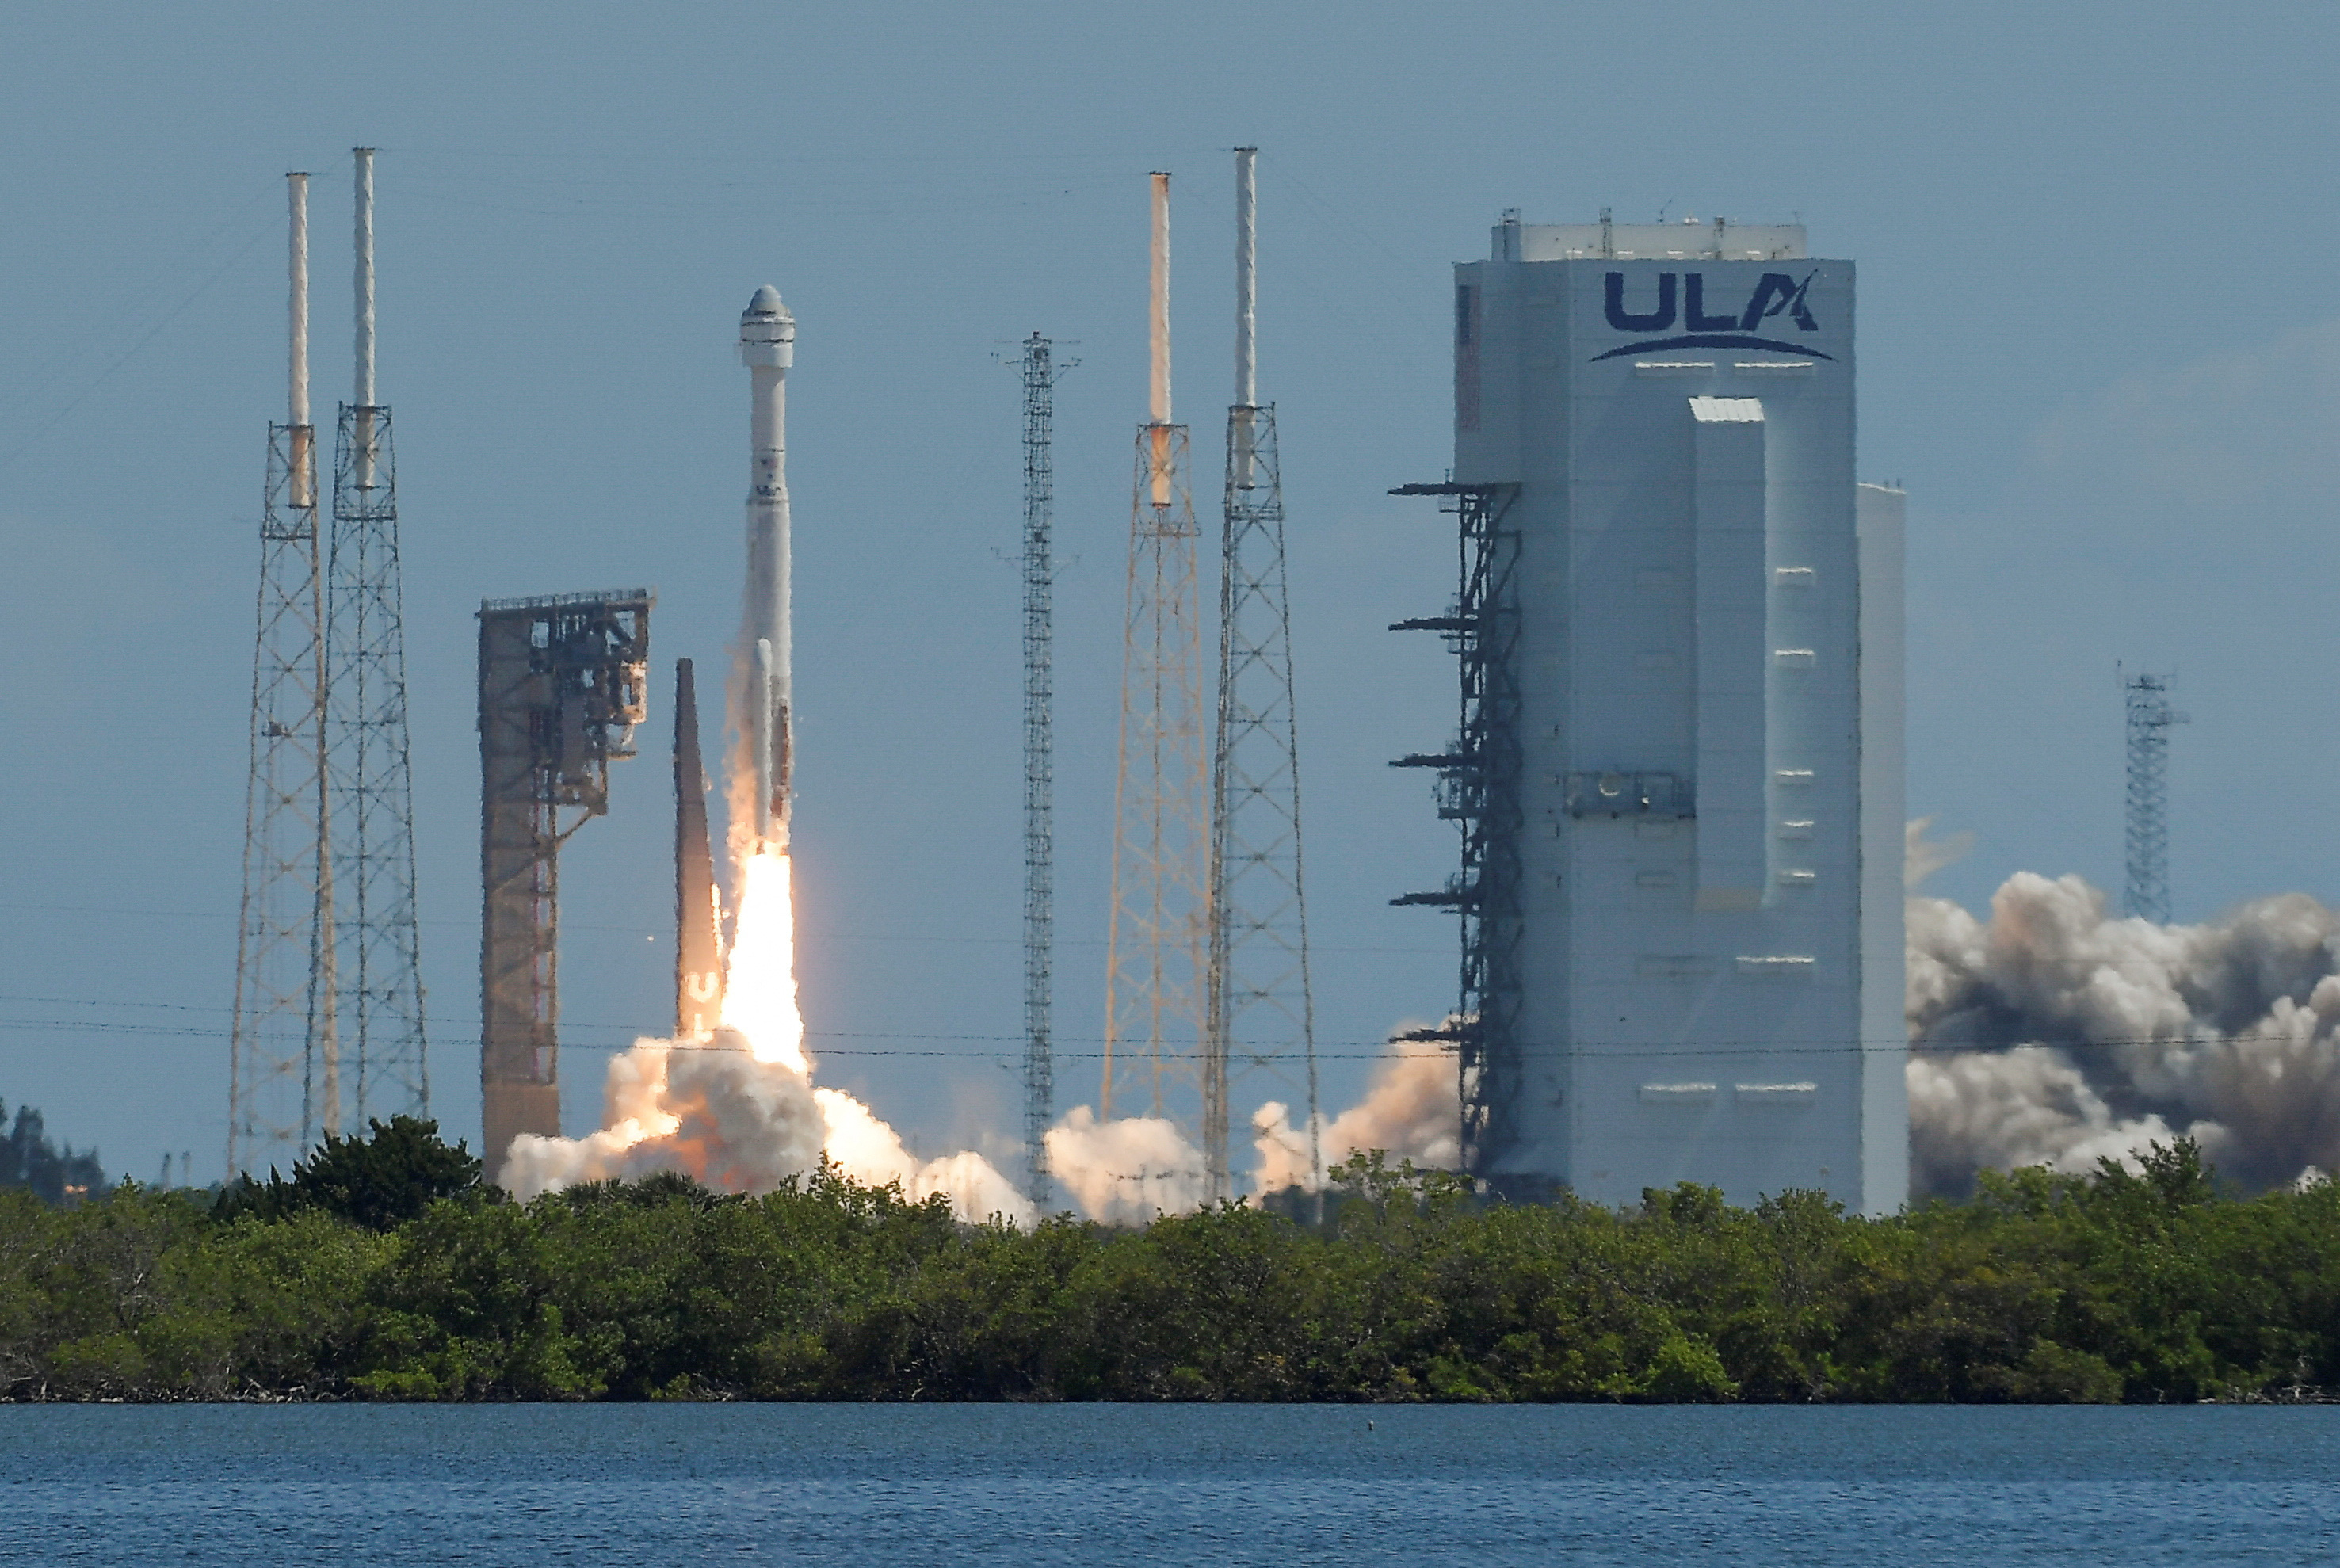 Boeing's Starliner-1 Crew Flight Test (CFT) mission on a United Launch Alliance Atlas V rocket to the International Space Station, in Cape Canavera